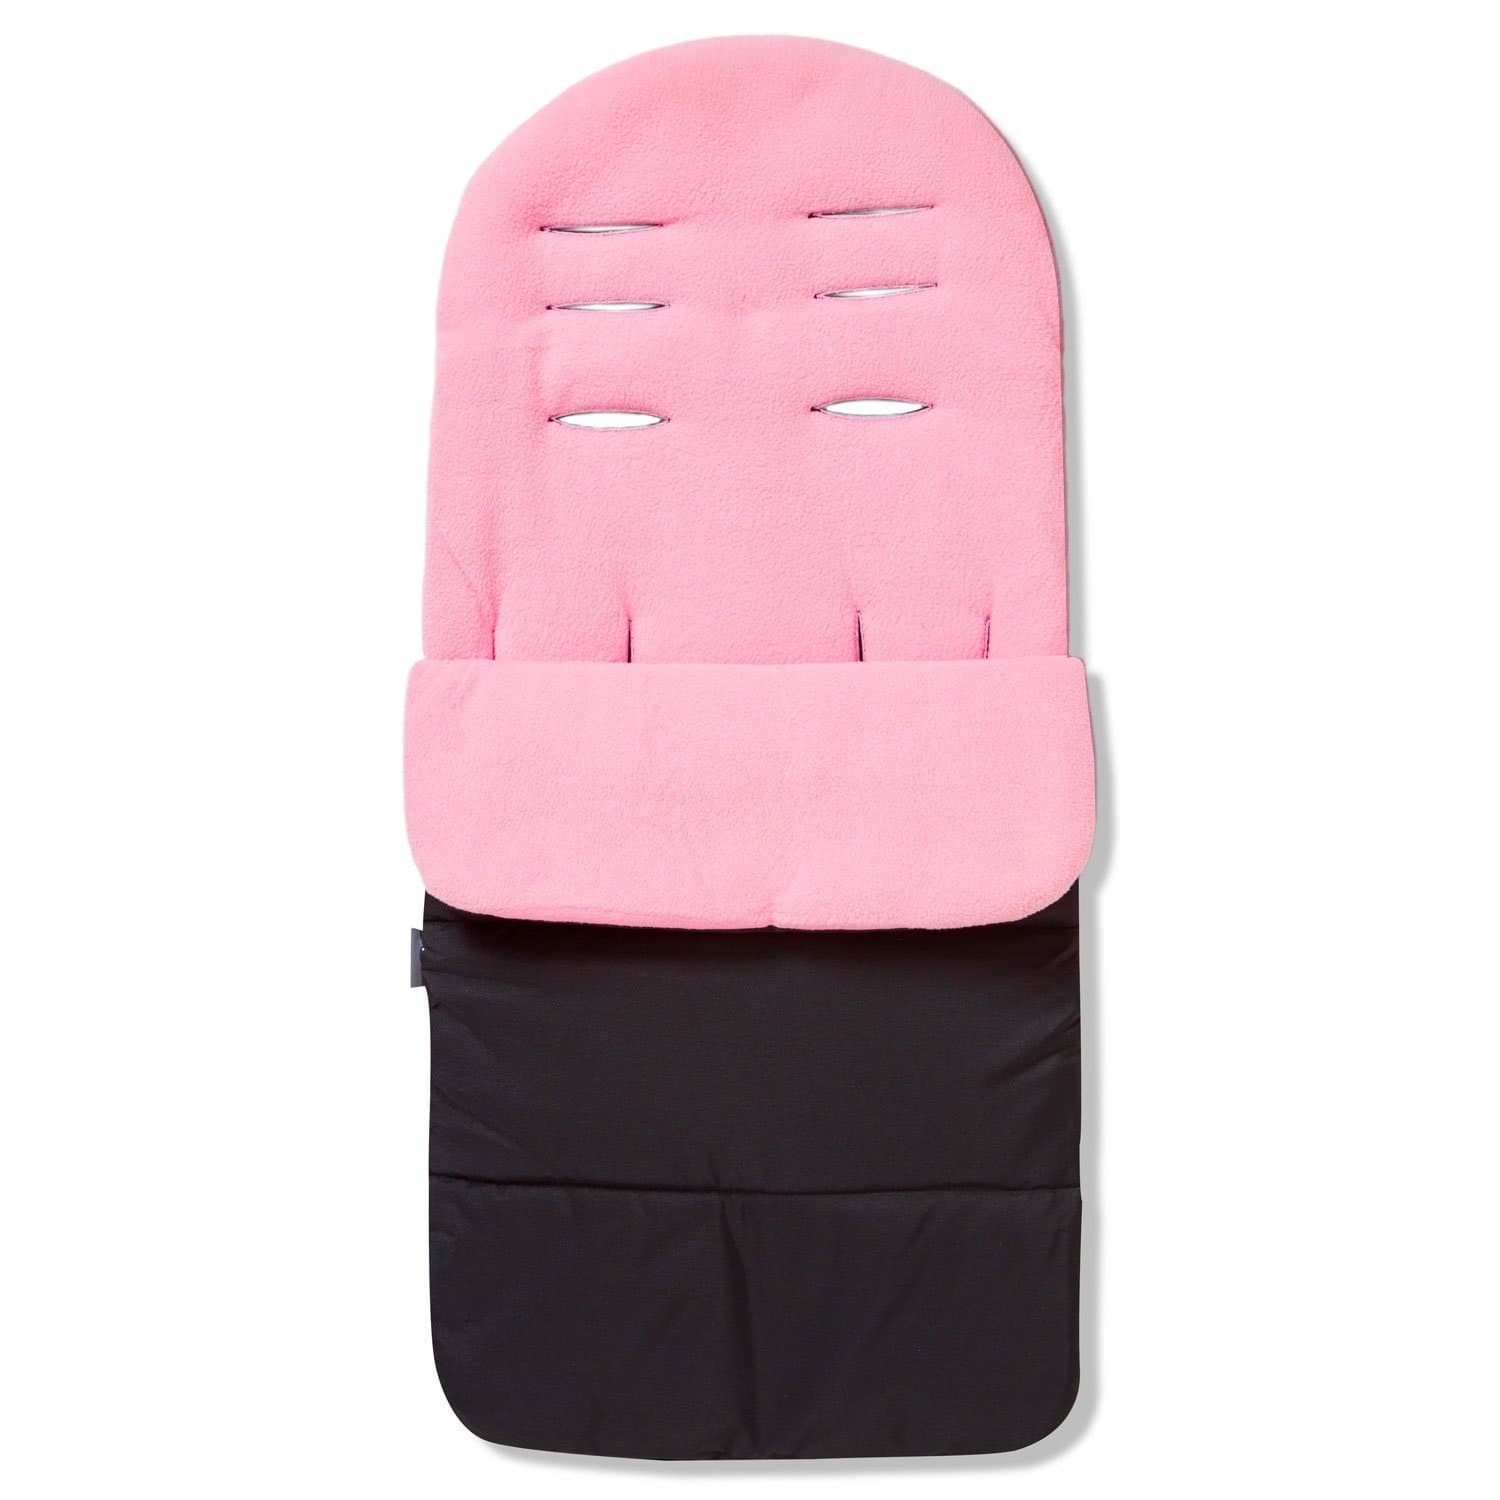 Premium Footmuff / Cosy Toes Compatible with Joie - Candy Pink / Fits All Models | For Your Little One